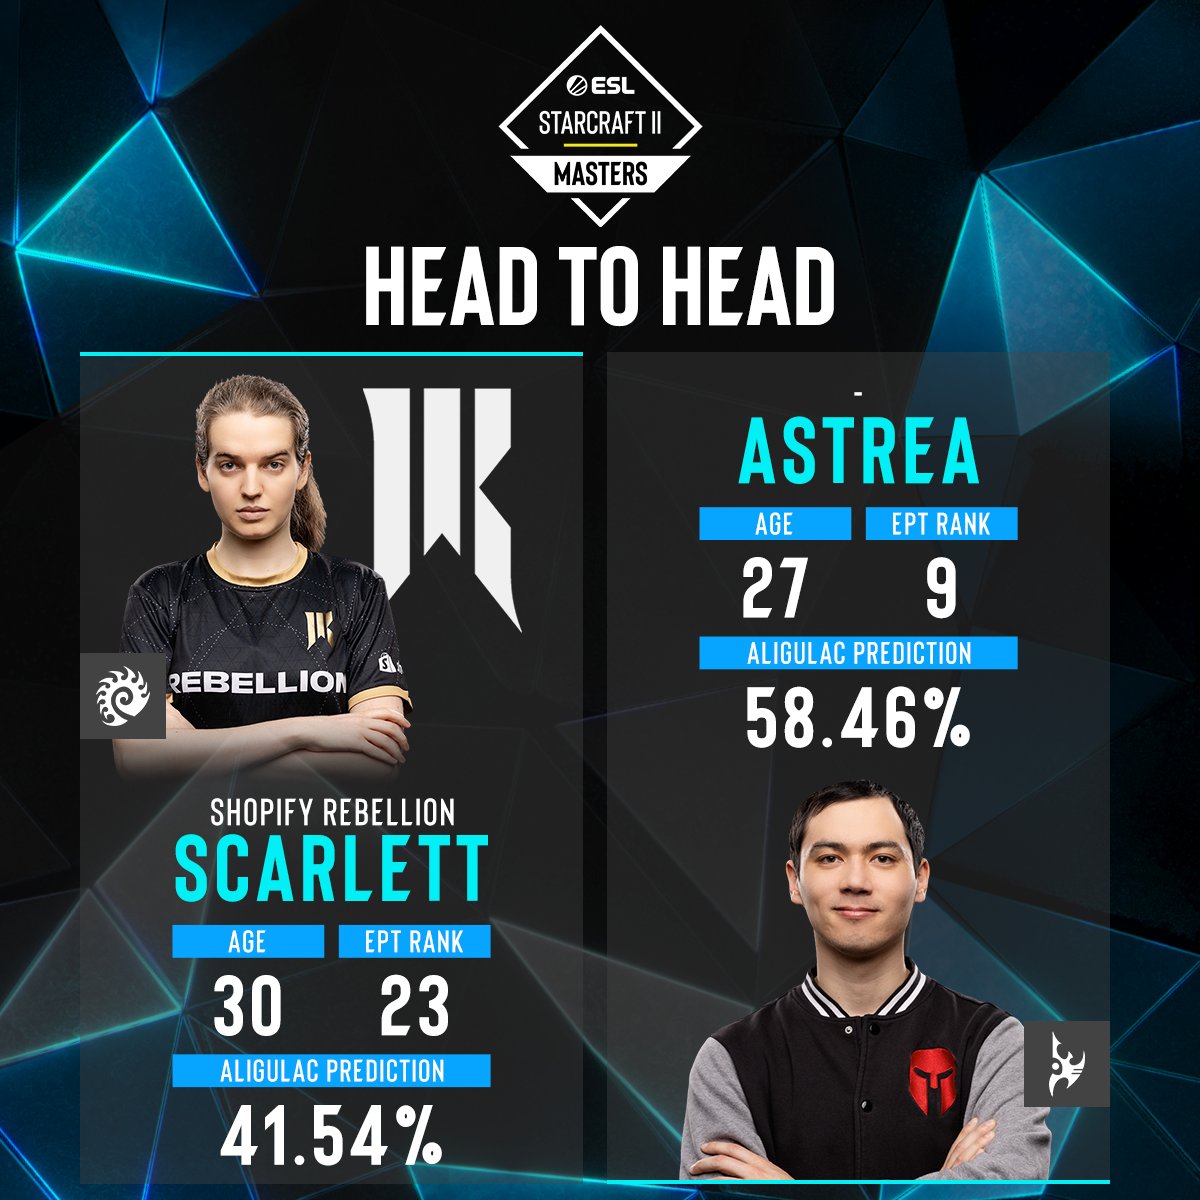 We have one more regional crown 👑 to give away, and to see who's going to contest Trigger for it in the grand final of the Americas, first @onfireScarlett and @SCAstrea have a score to settle in the LB final.